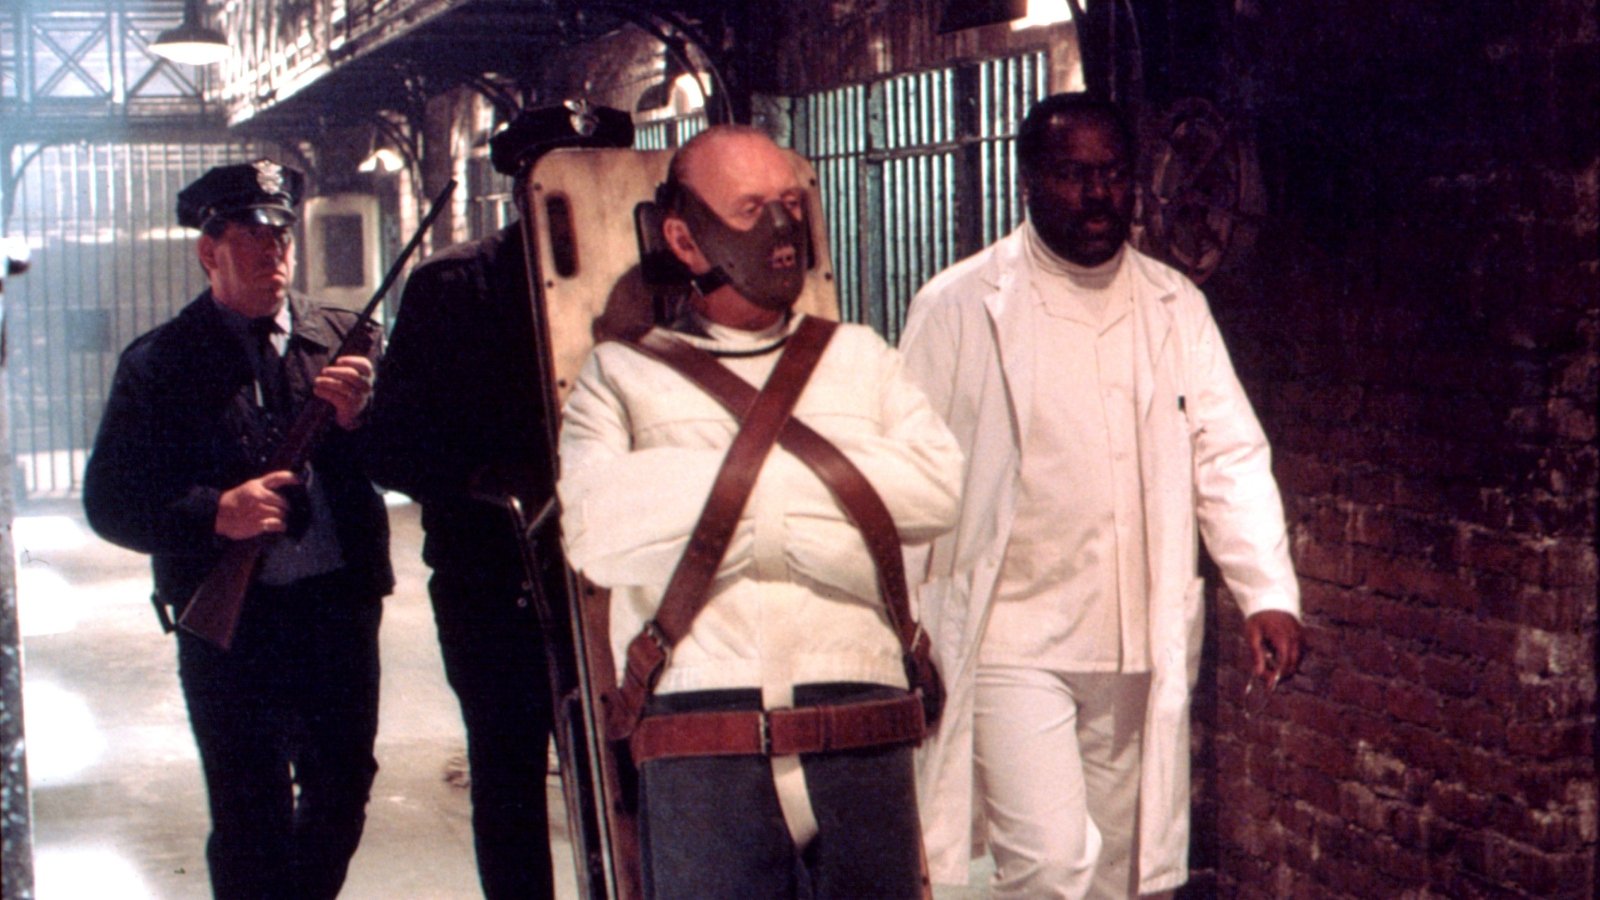 Anthony Hopkins as Hannibal Lecter being wheeled on an upright stretcher surrounded by prison guards